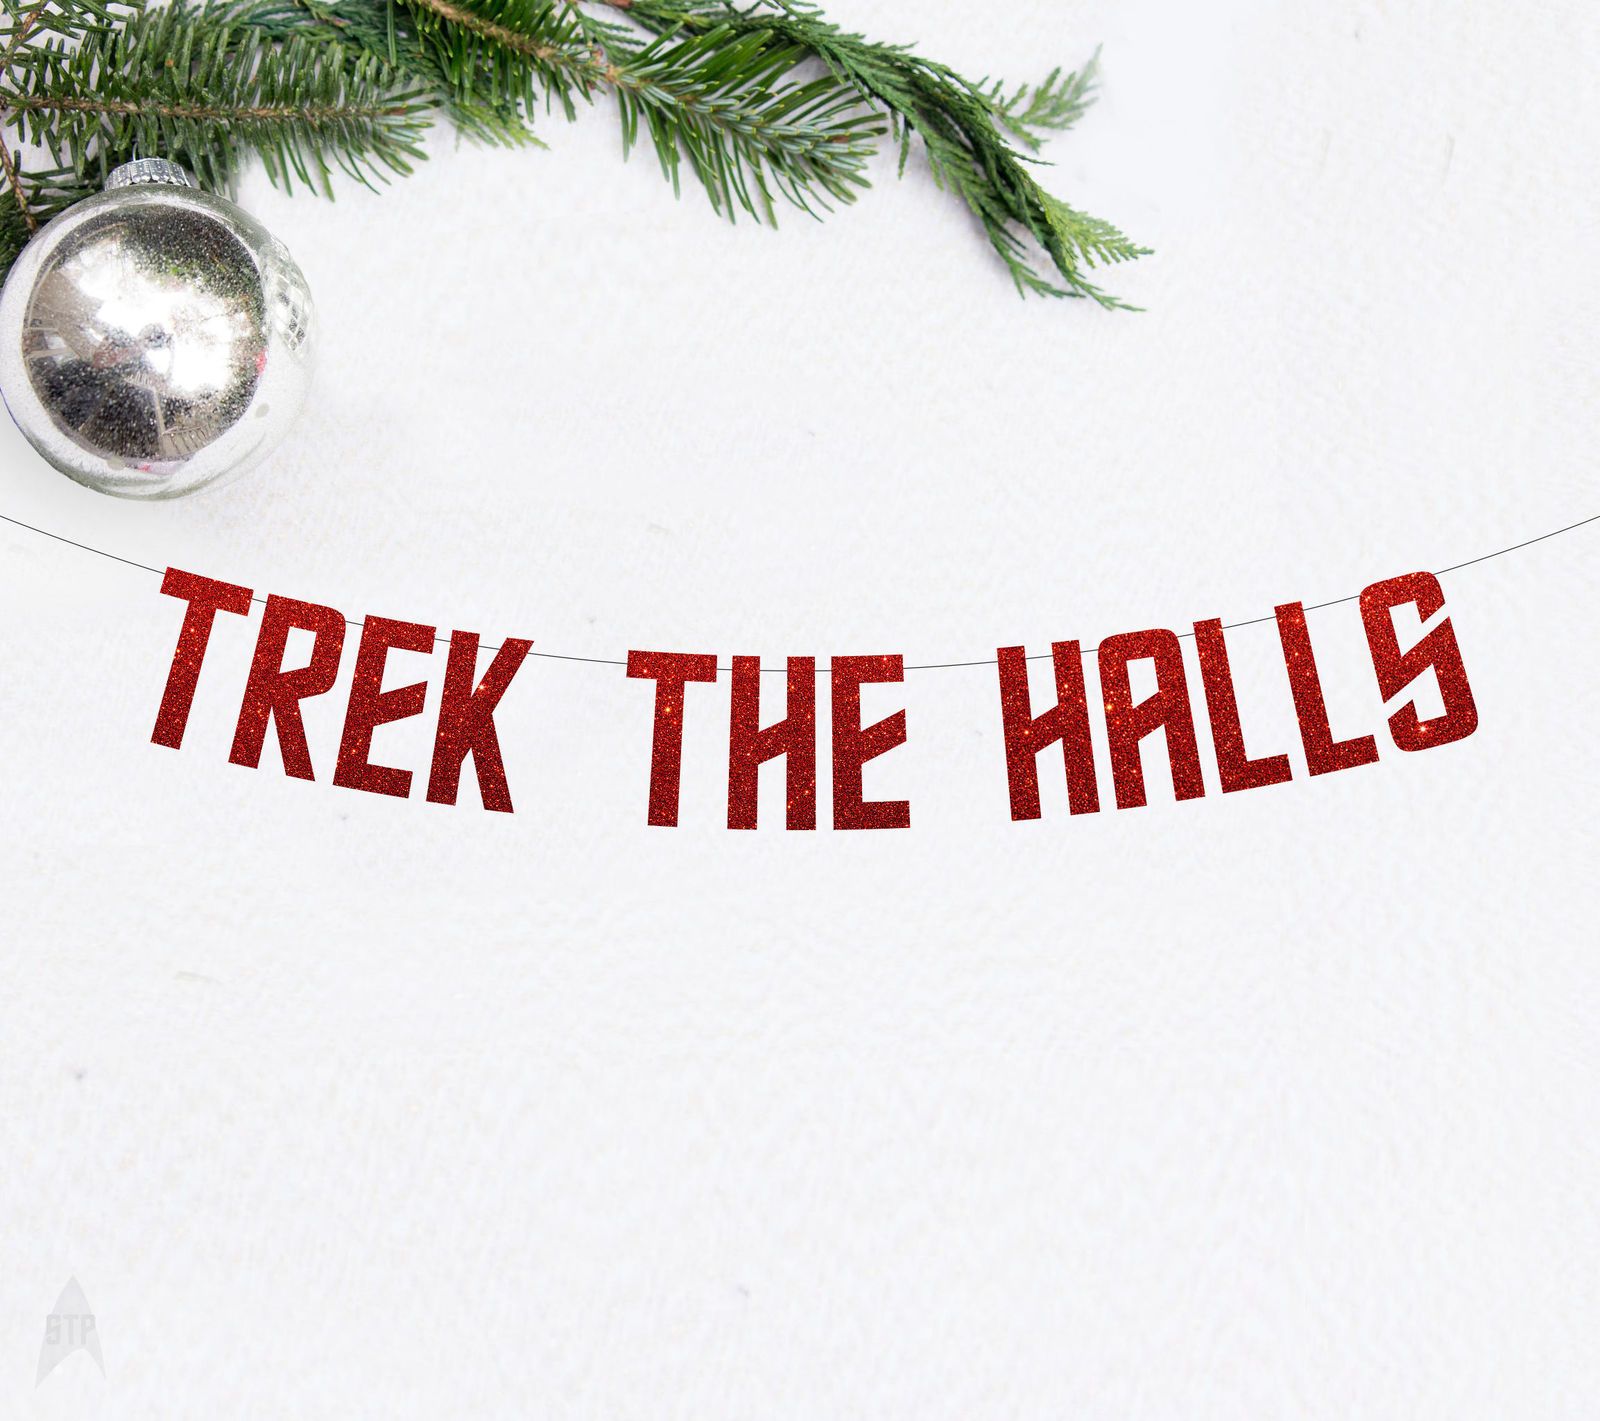 13 Best Christmas Decorations Every Geek Should Own image 17